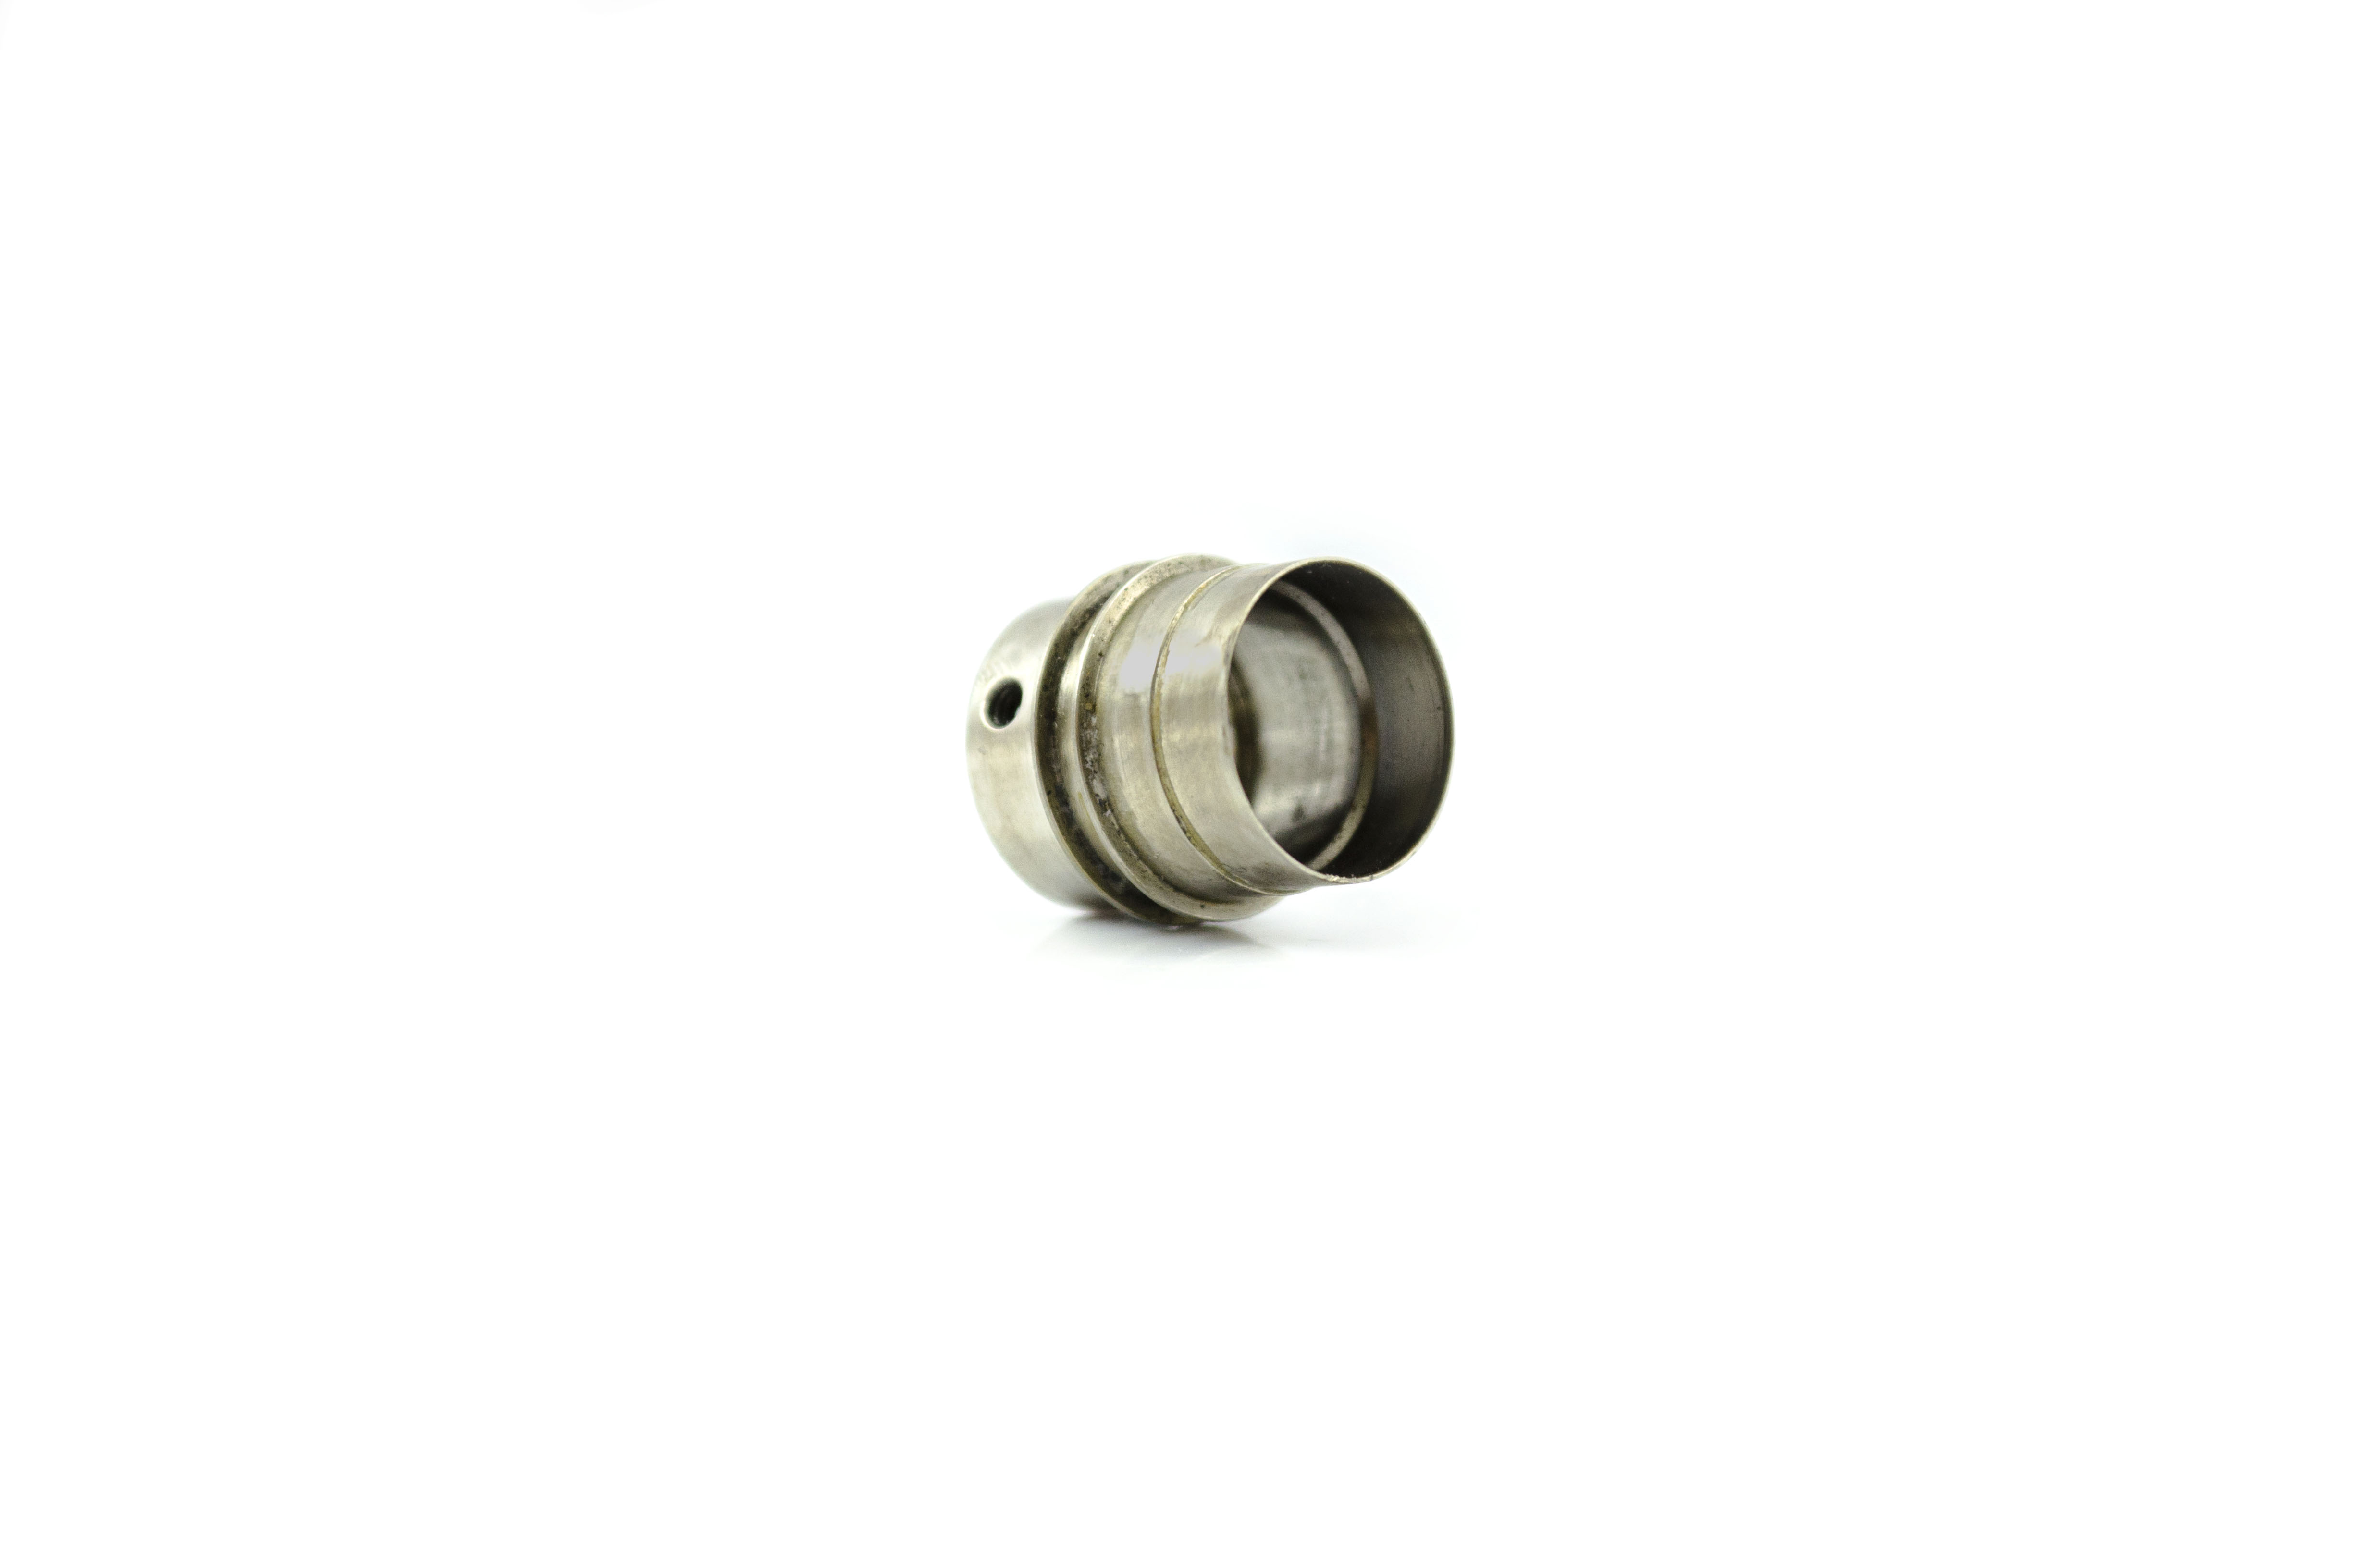 OEM Insertion Tube Proximal End Fitting - GIF-P20, GIF-PQ20